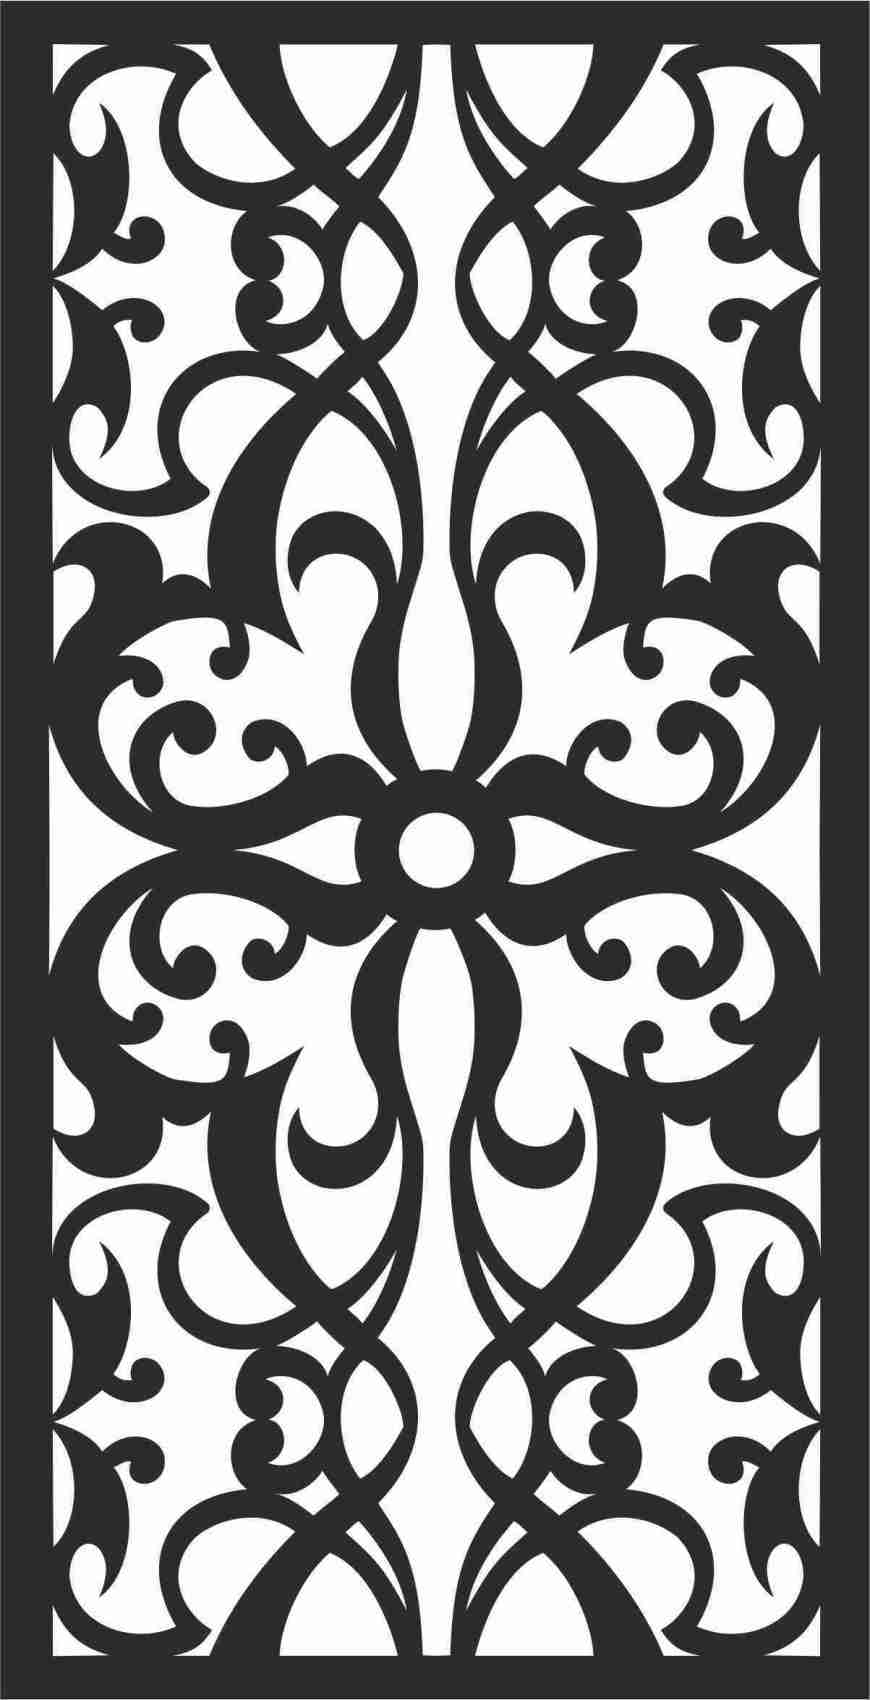 Royal Grill Screen Panel DXF File